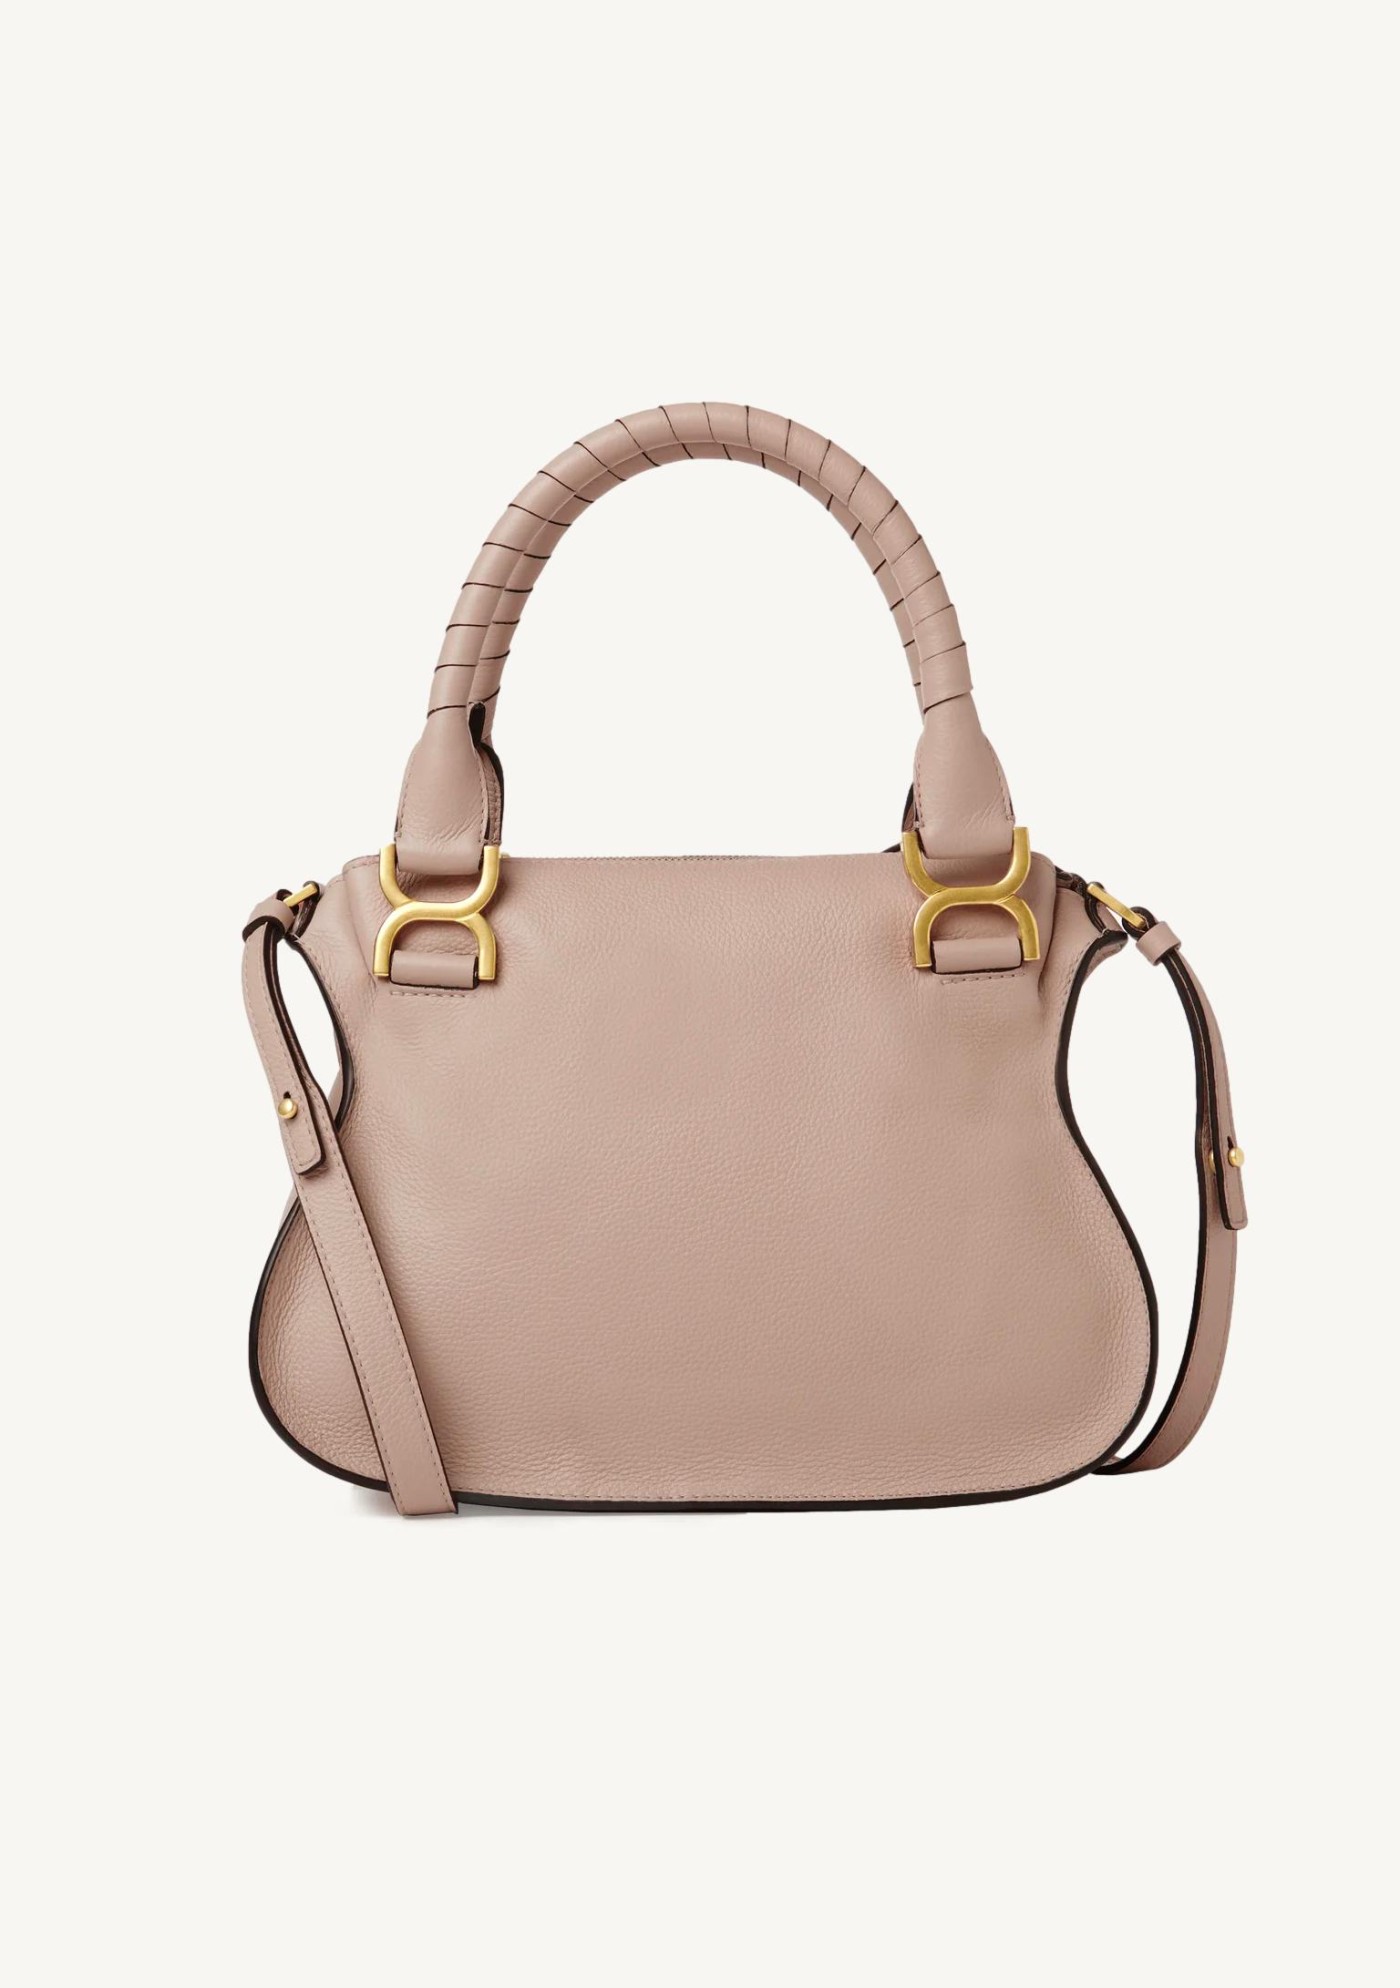 Small double bag marcie Nomad beige